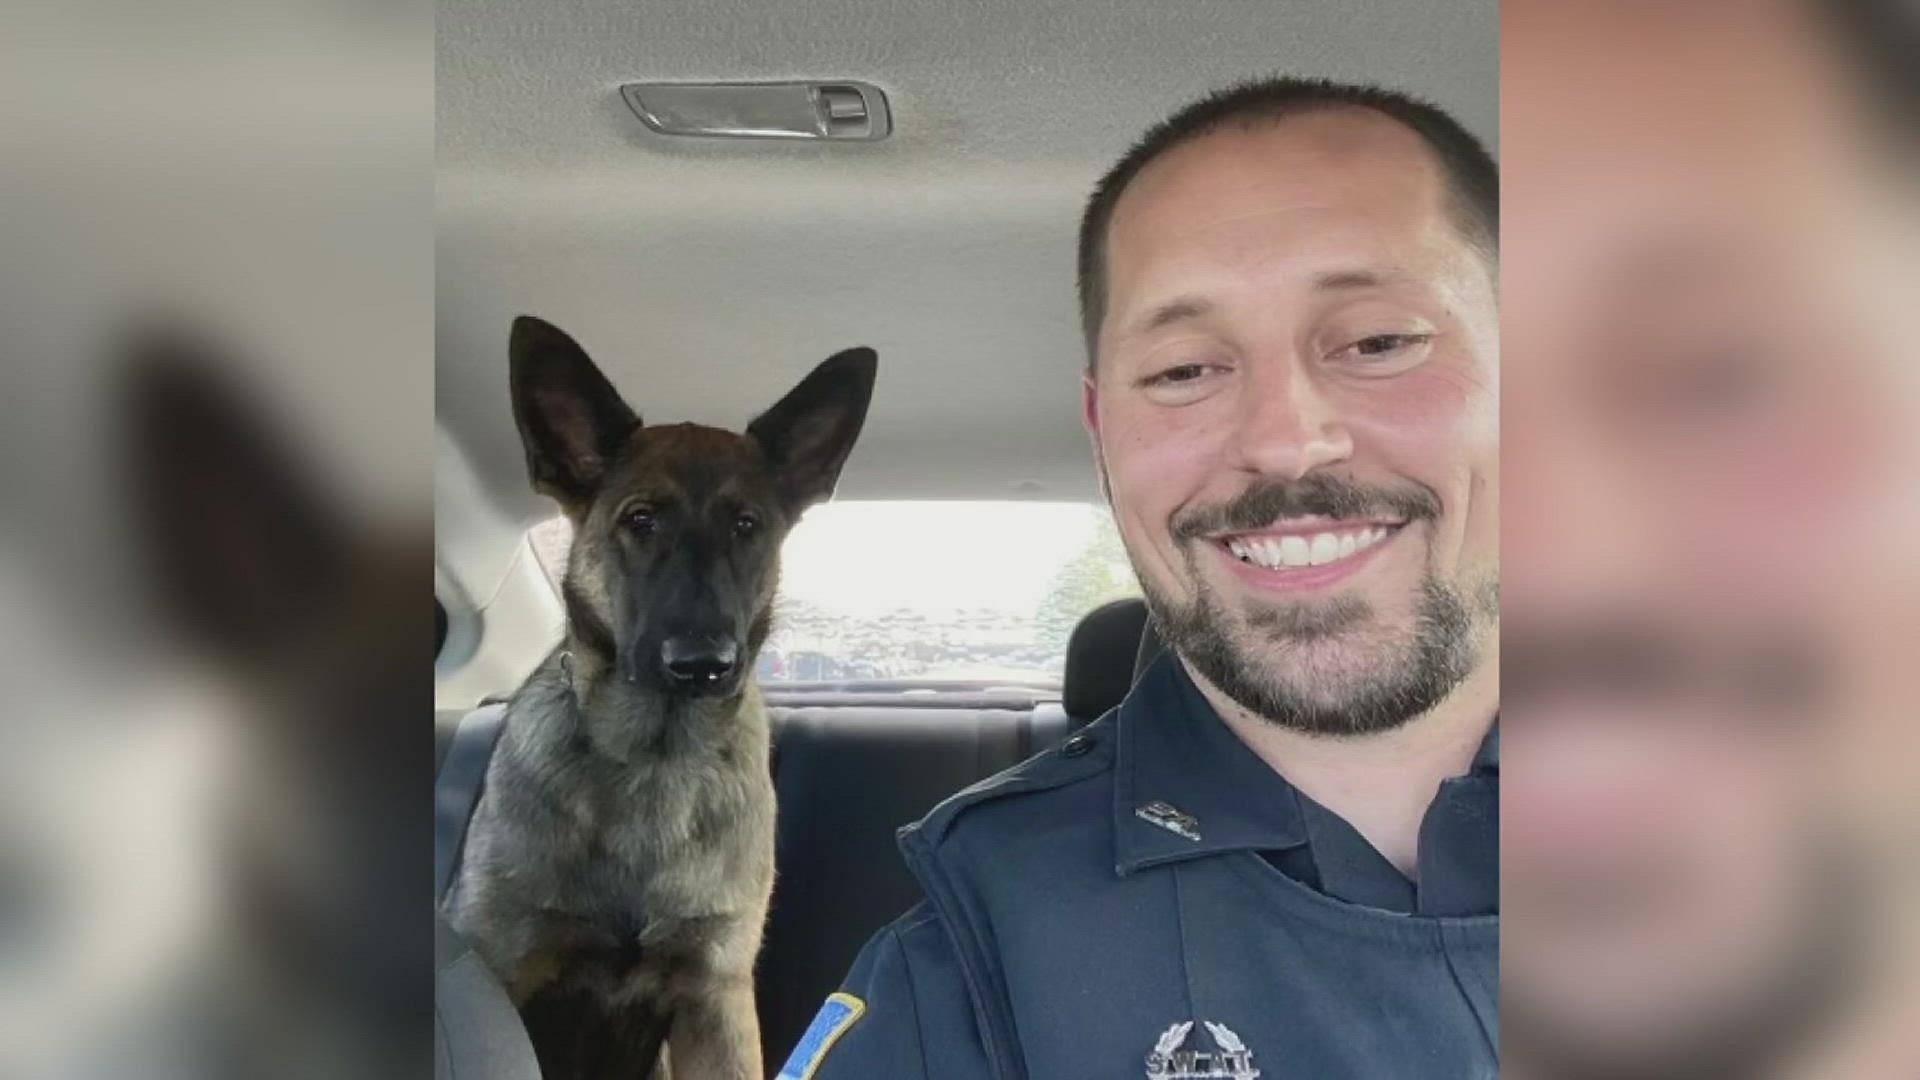 The Port Arthur Police Department is welcoming a cute new furry face to the force.